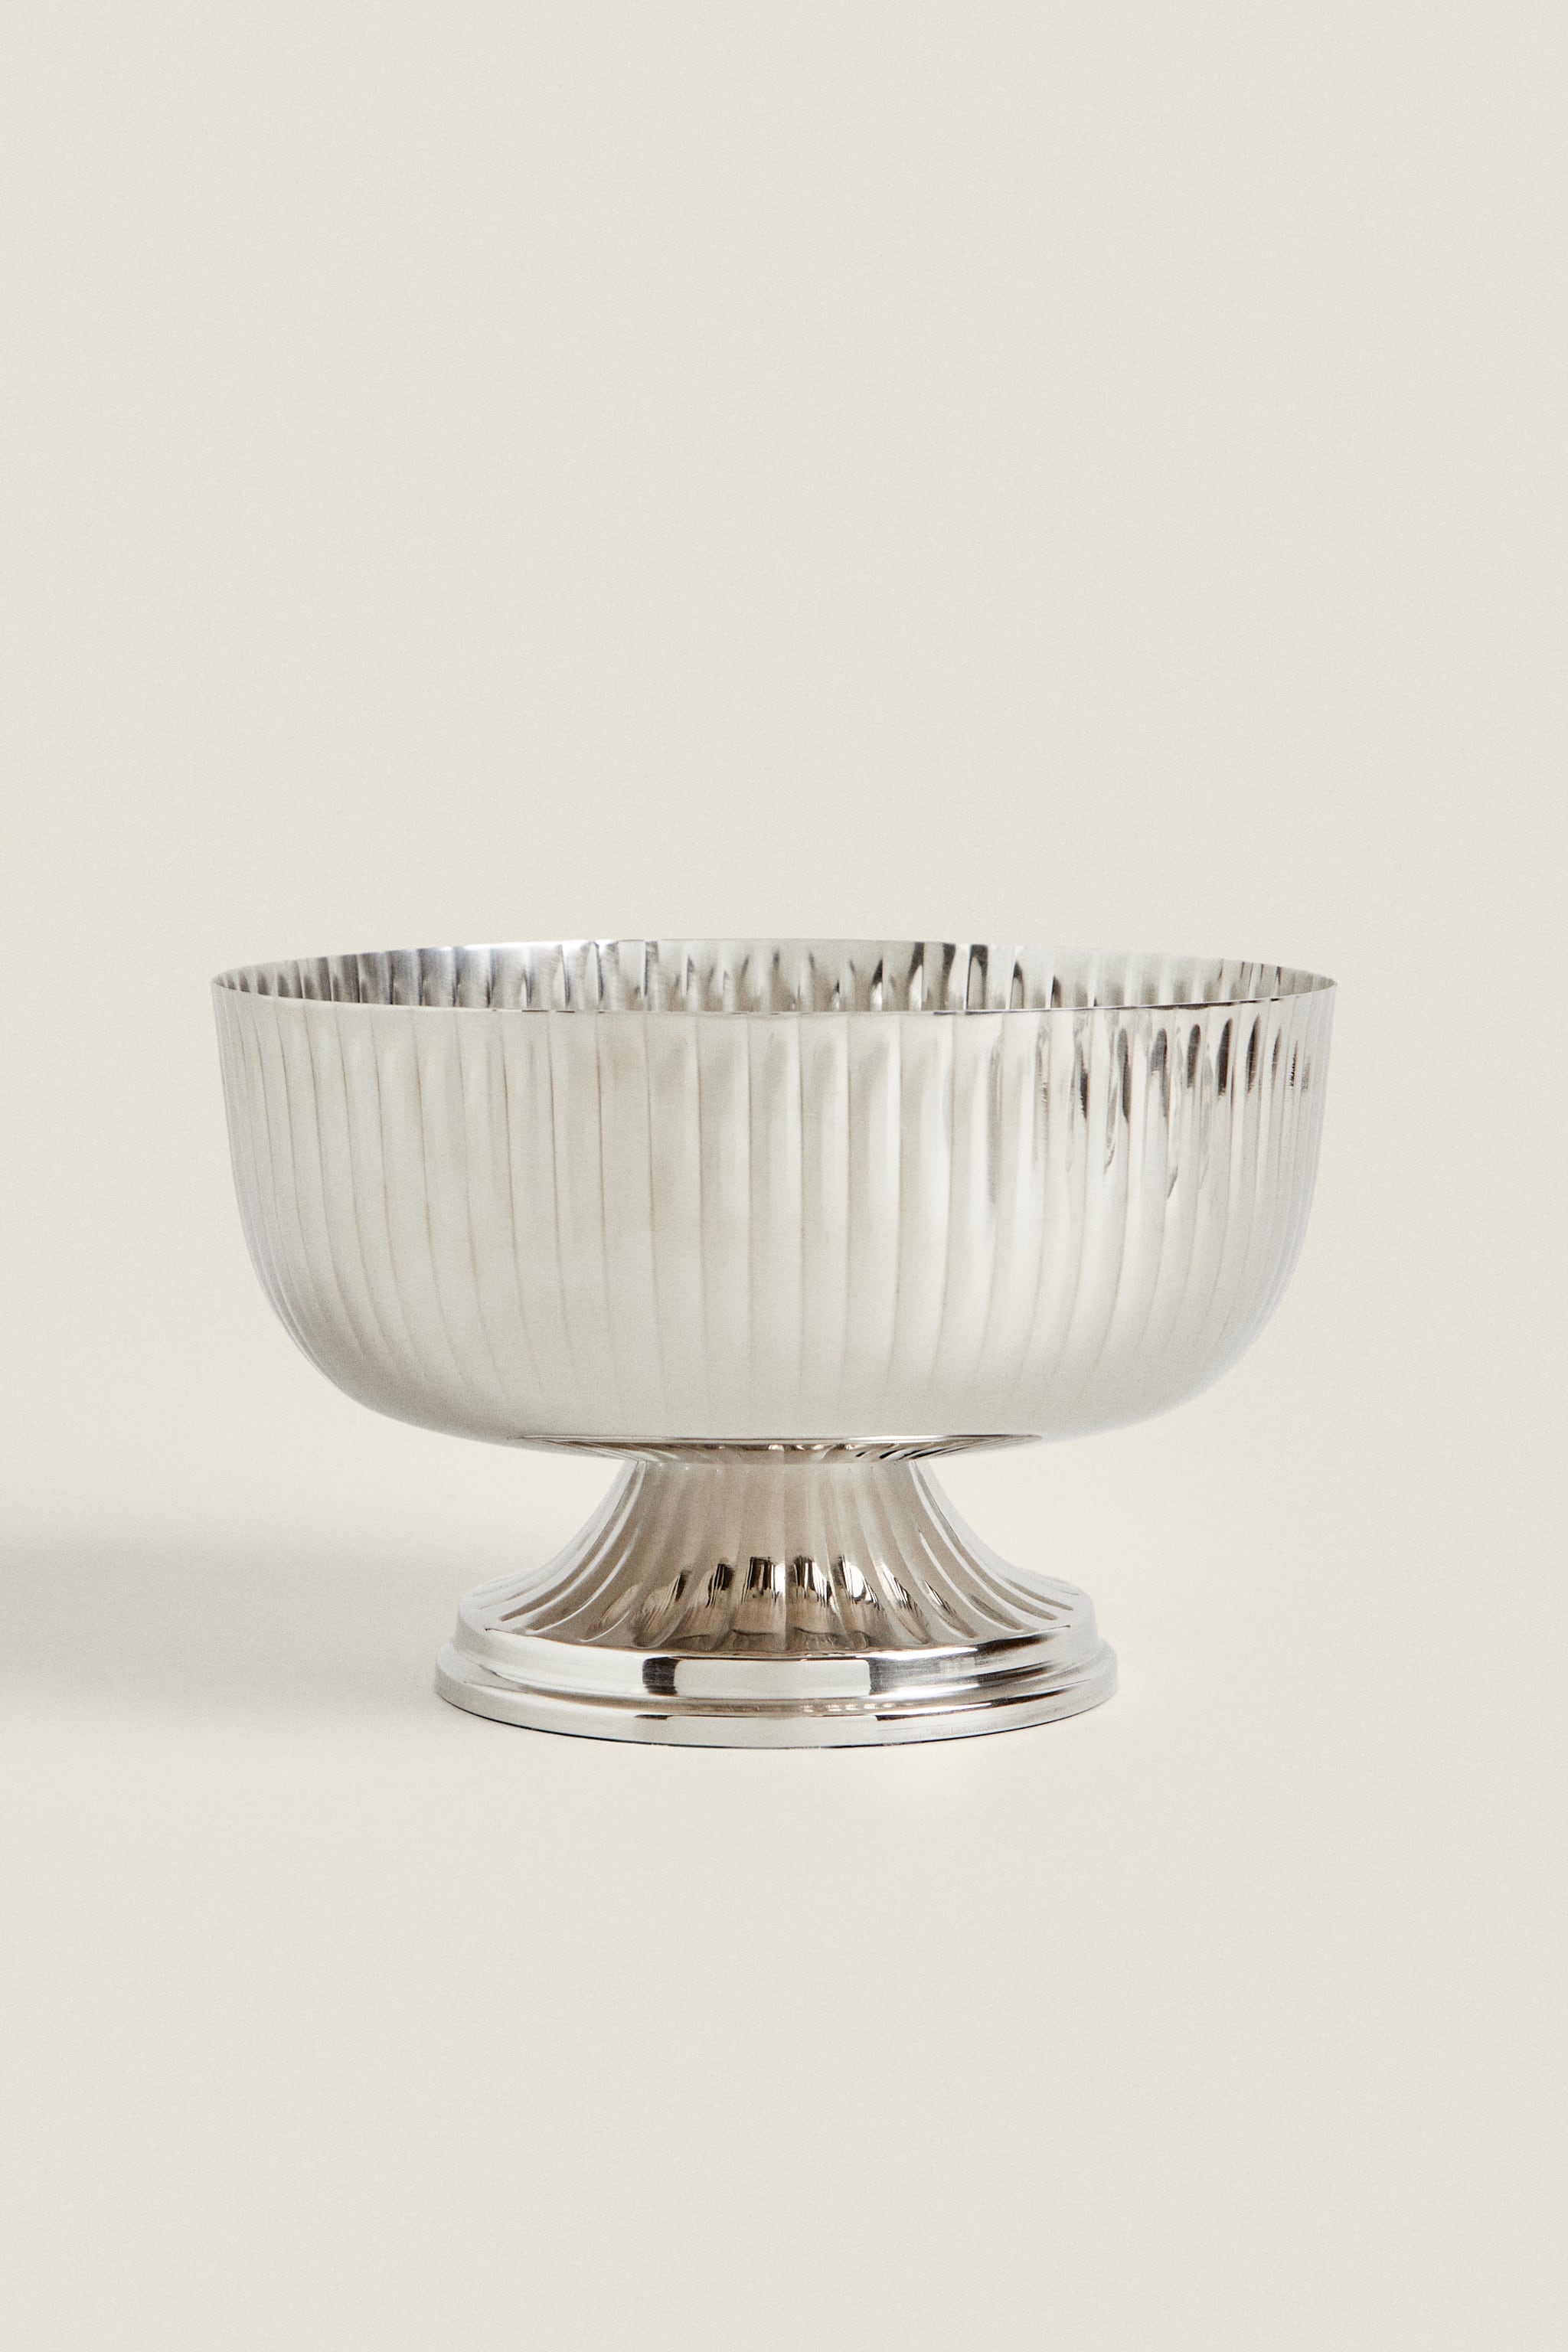 TALL SERVING DISH WITH TRIM DETAIL